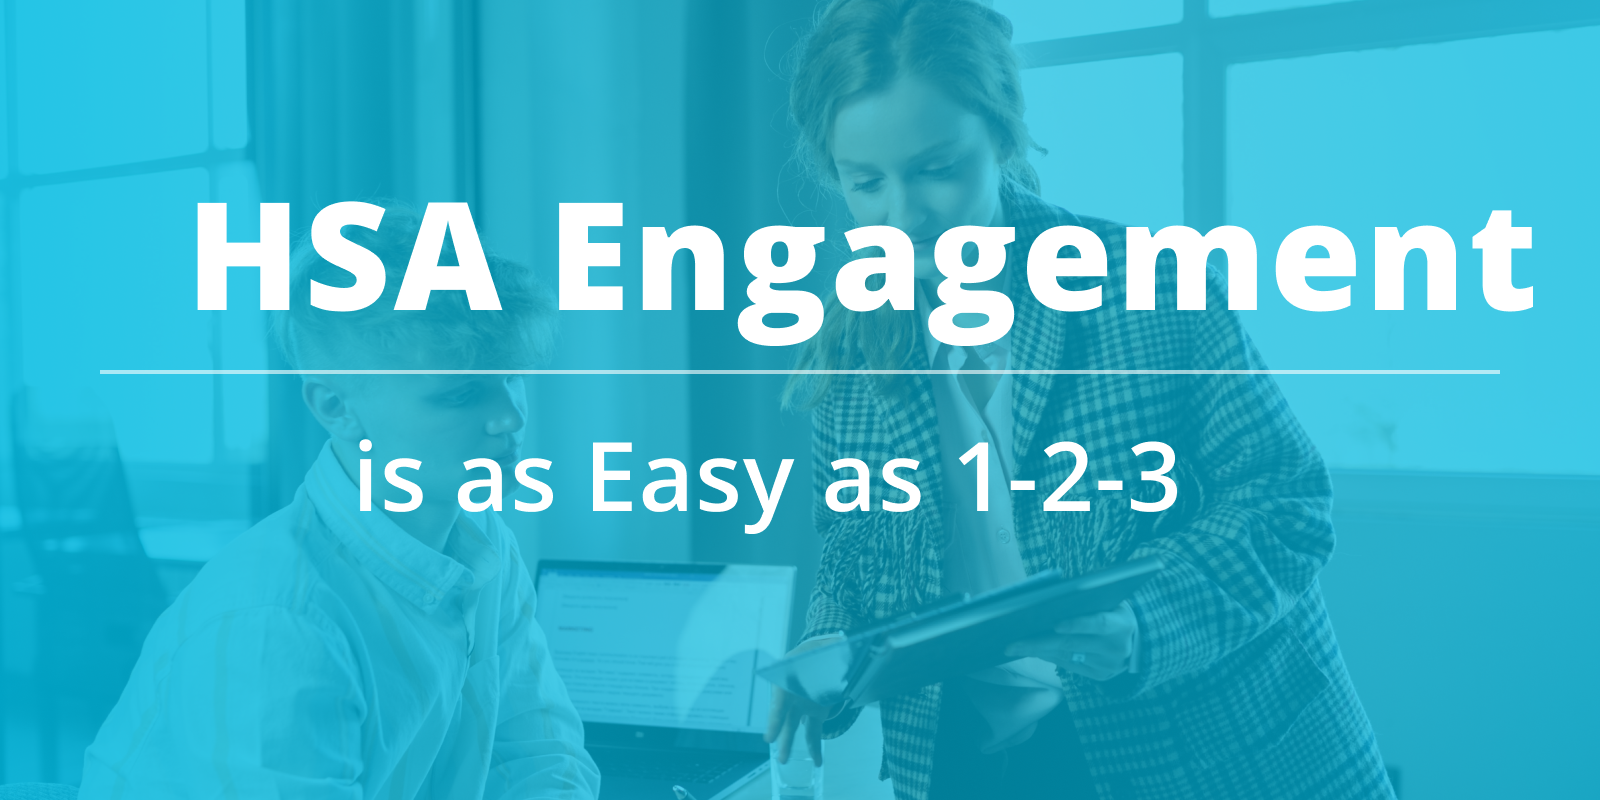 HSA Engagement is as Easy as 1-2-3